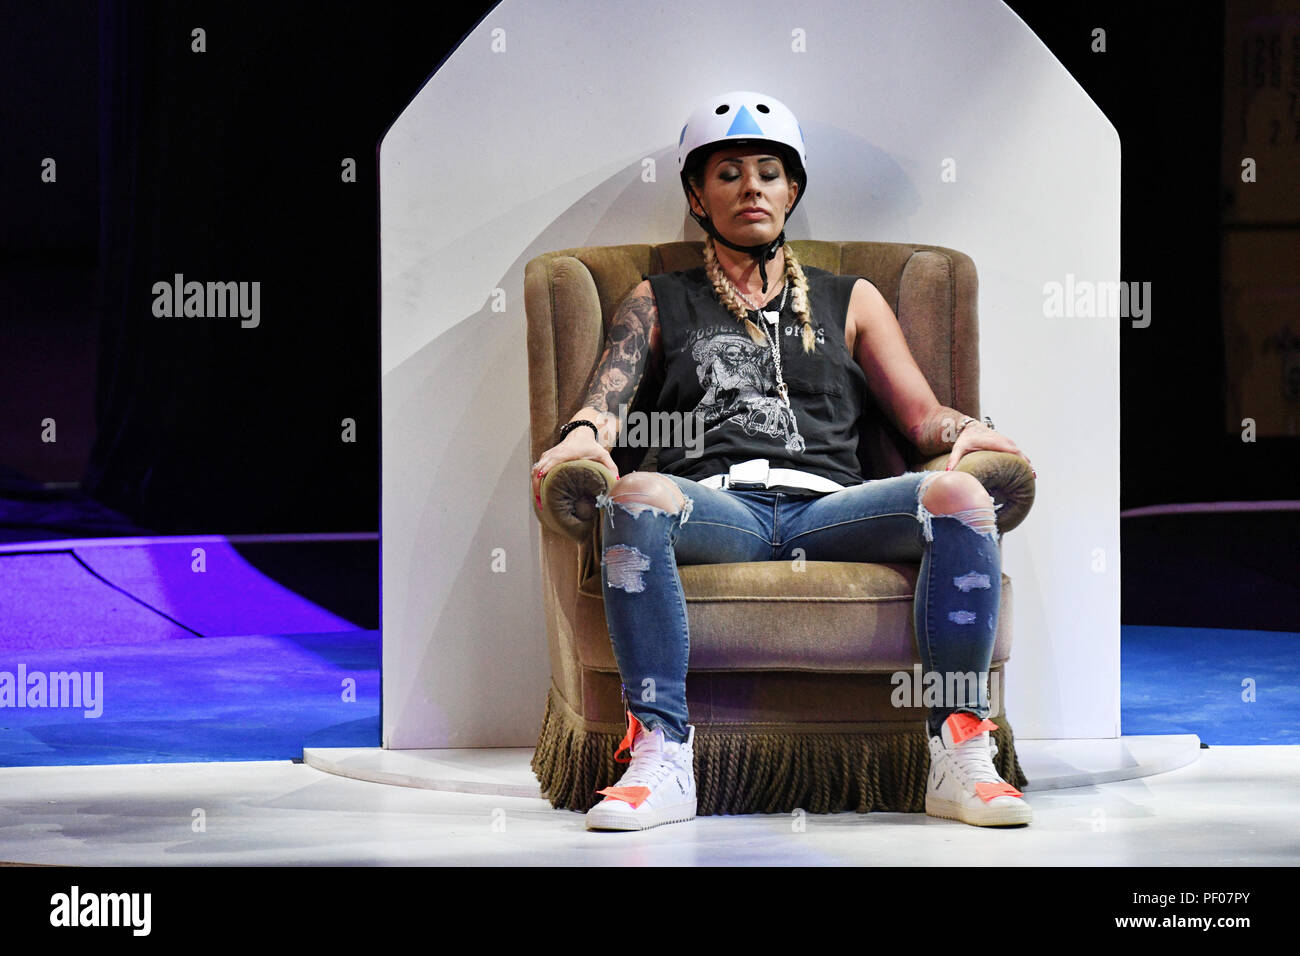 Cologne, Germany. 17th Aug, 2018. Cora Schumacher sits on stage at the opening show of the new season of the Sat.1 reality show 'Promi Big Brother'. Credit: Henning Kaiser/dpa/Alamy Live News Stock Photo